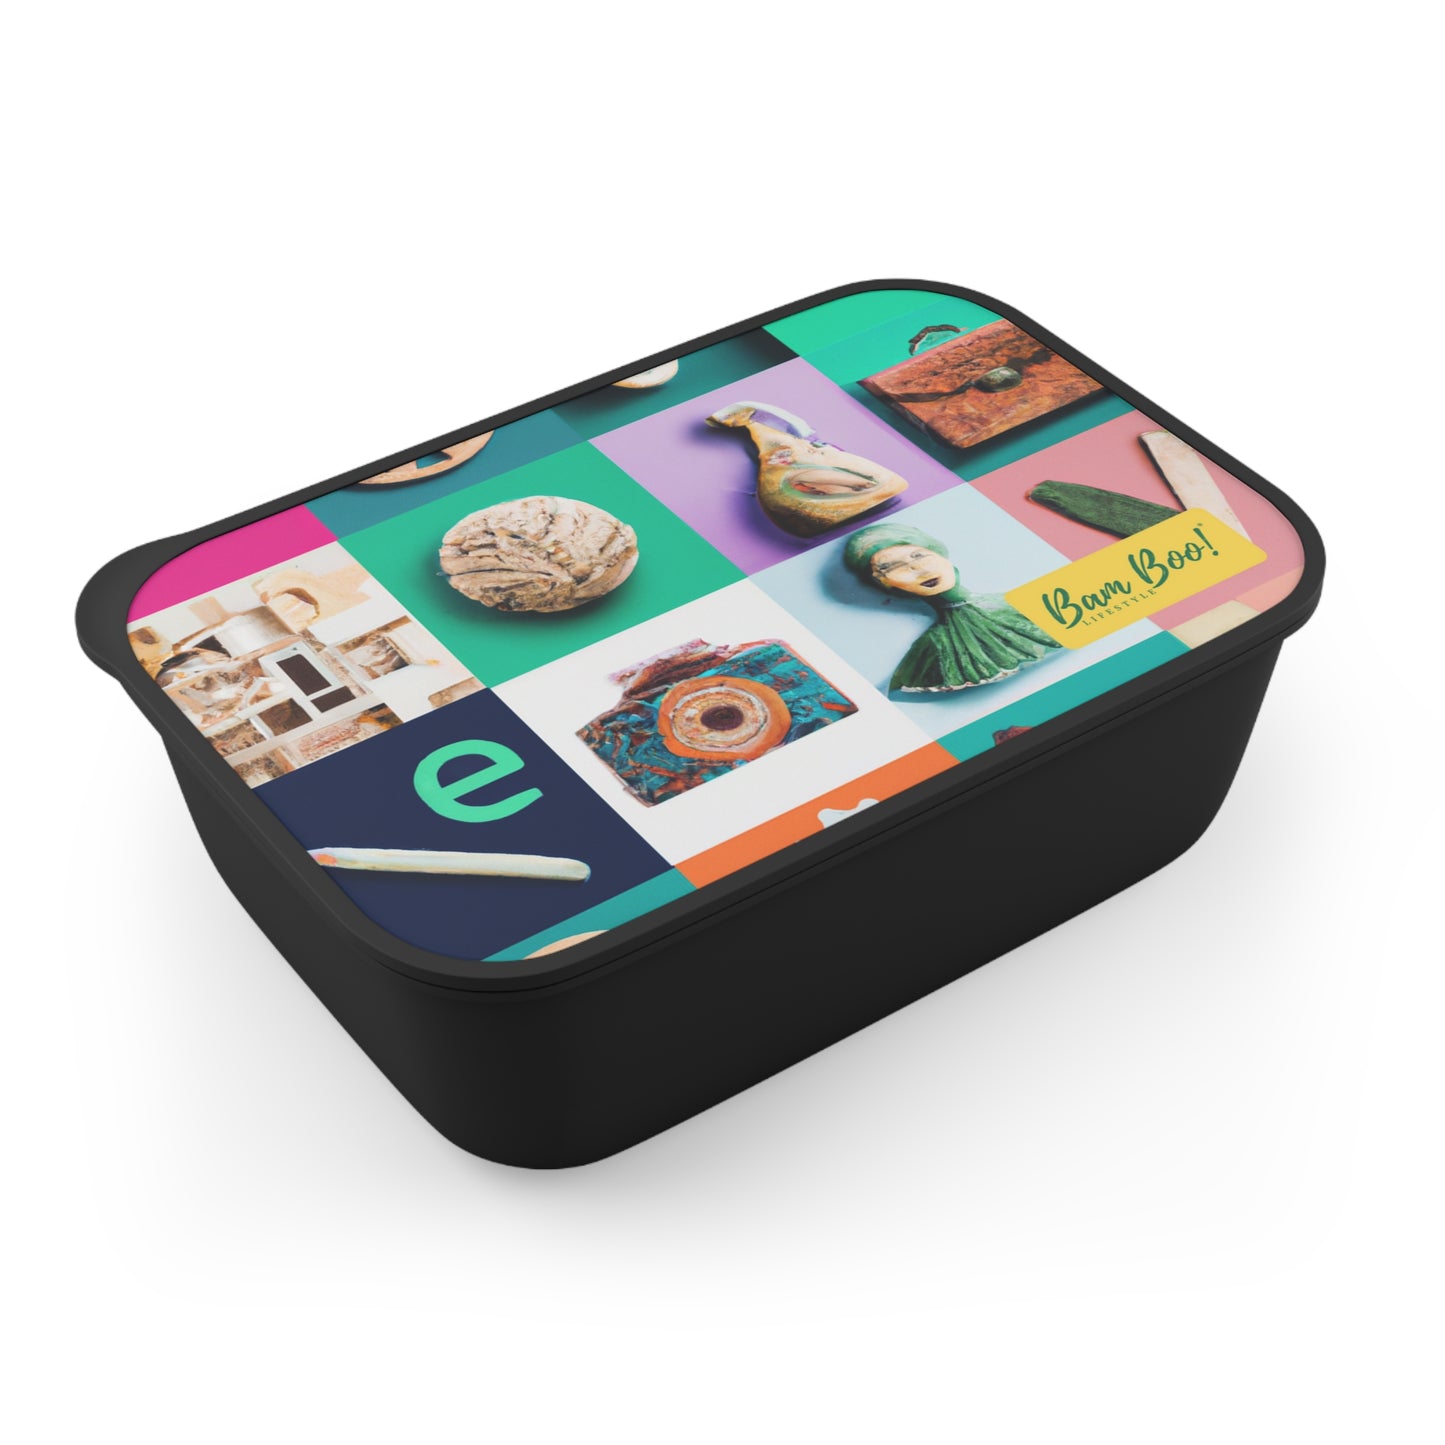 Mosaic of Motivation - Bam Boo! Lifestyle Eco-friendly PLA Bento Box with Band and Utensils